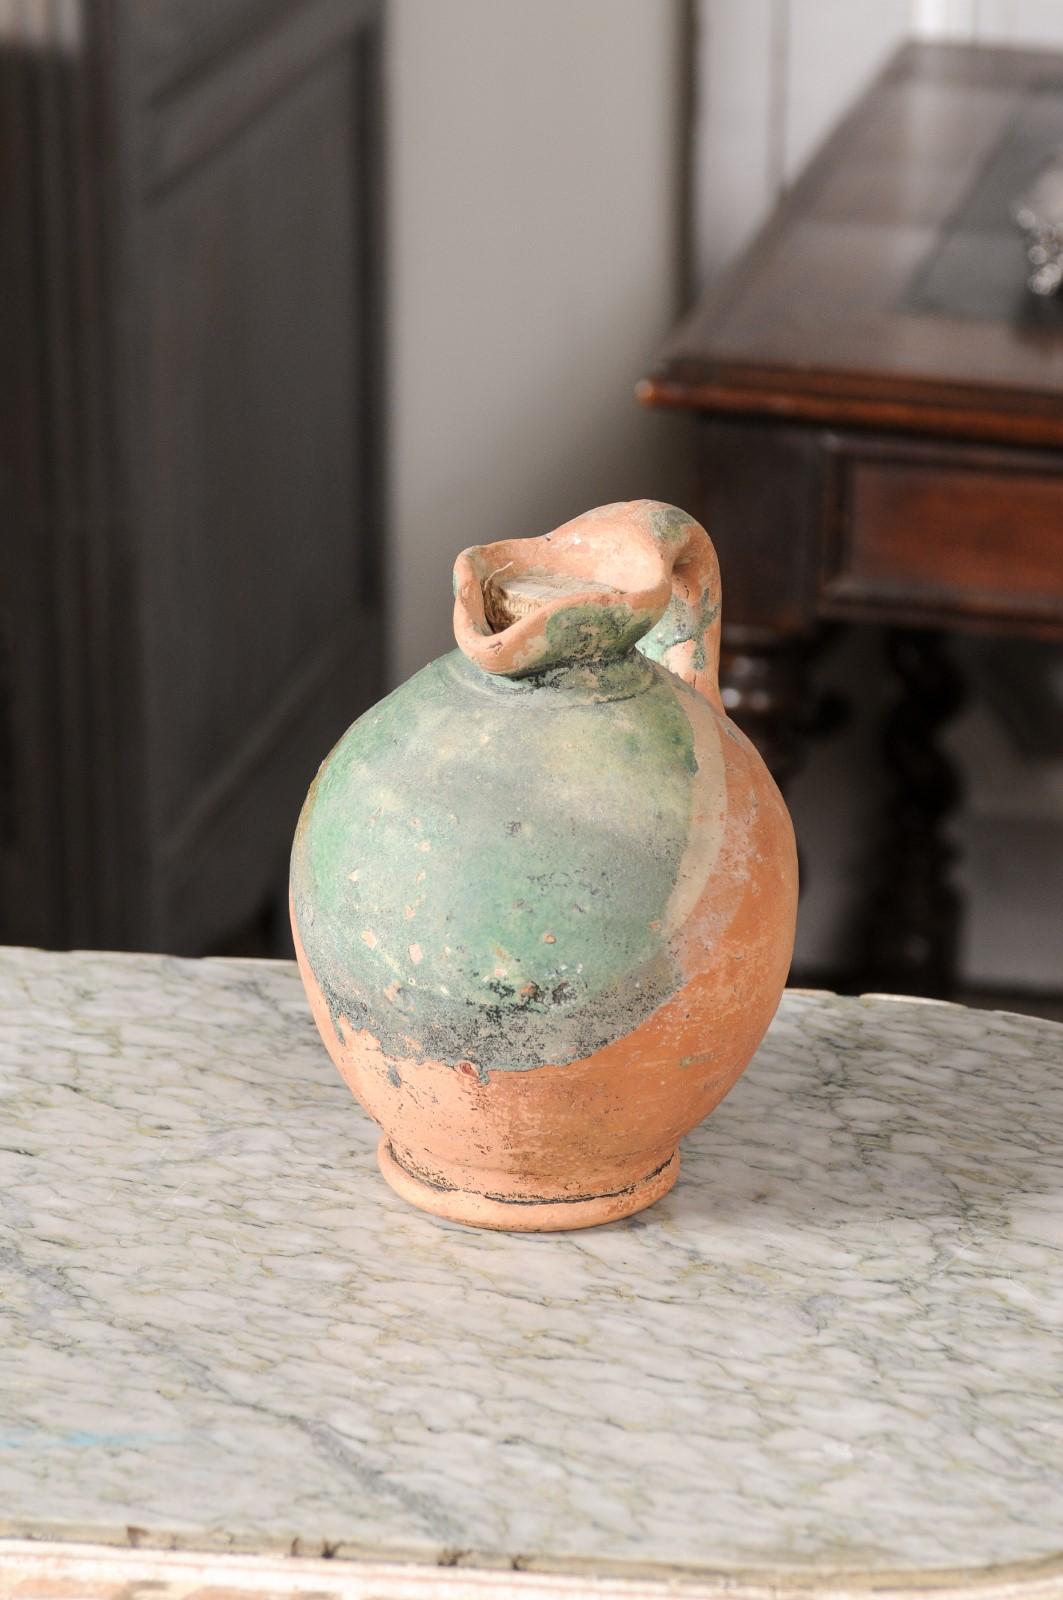 Rustic French Provincial 19th Century Pottery Jug with Green Glazed Accents For Sale 7